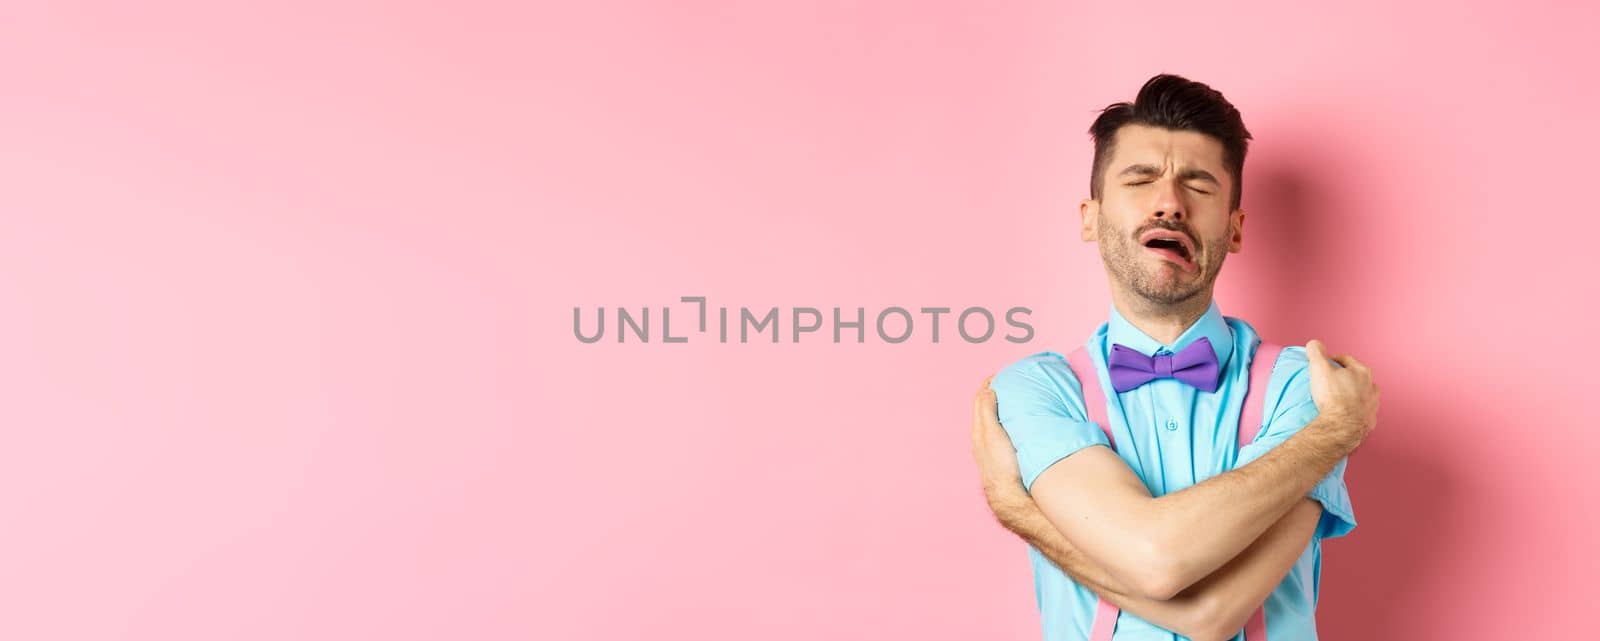 Crying guy hugging himself, feeling sad and lonely, standing unhappy on pink background. Copy space